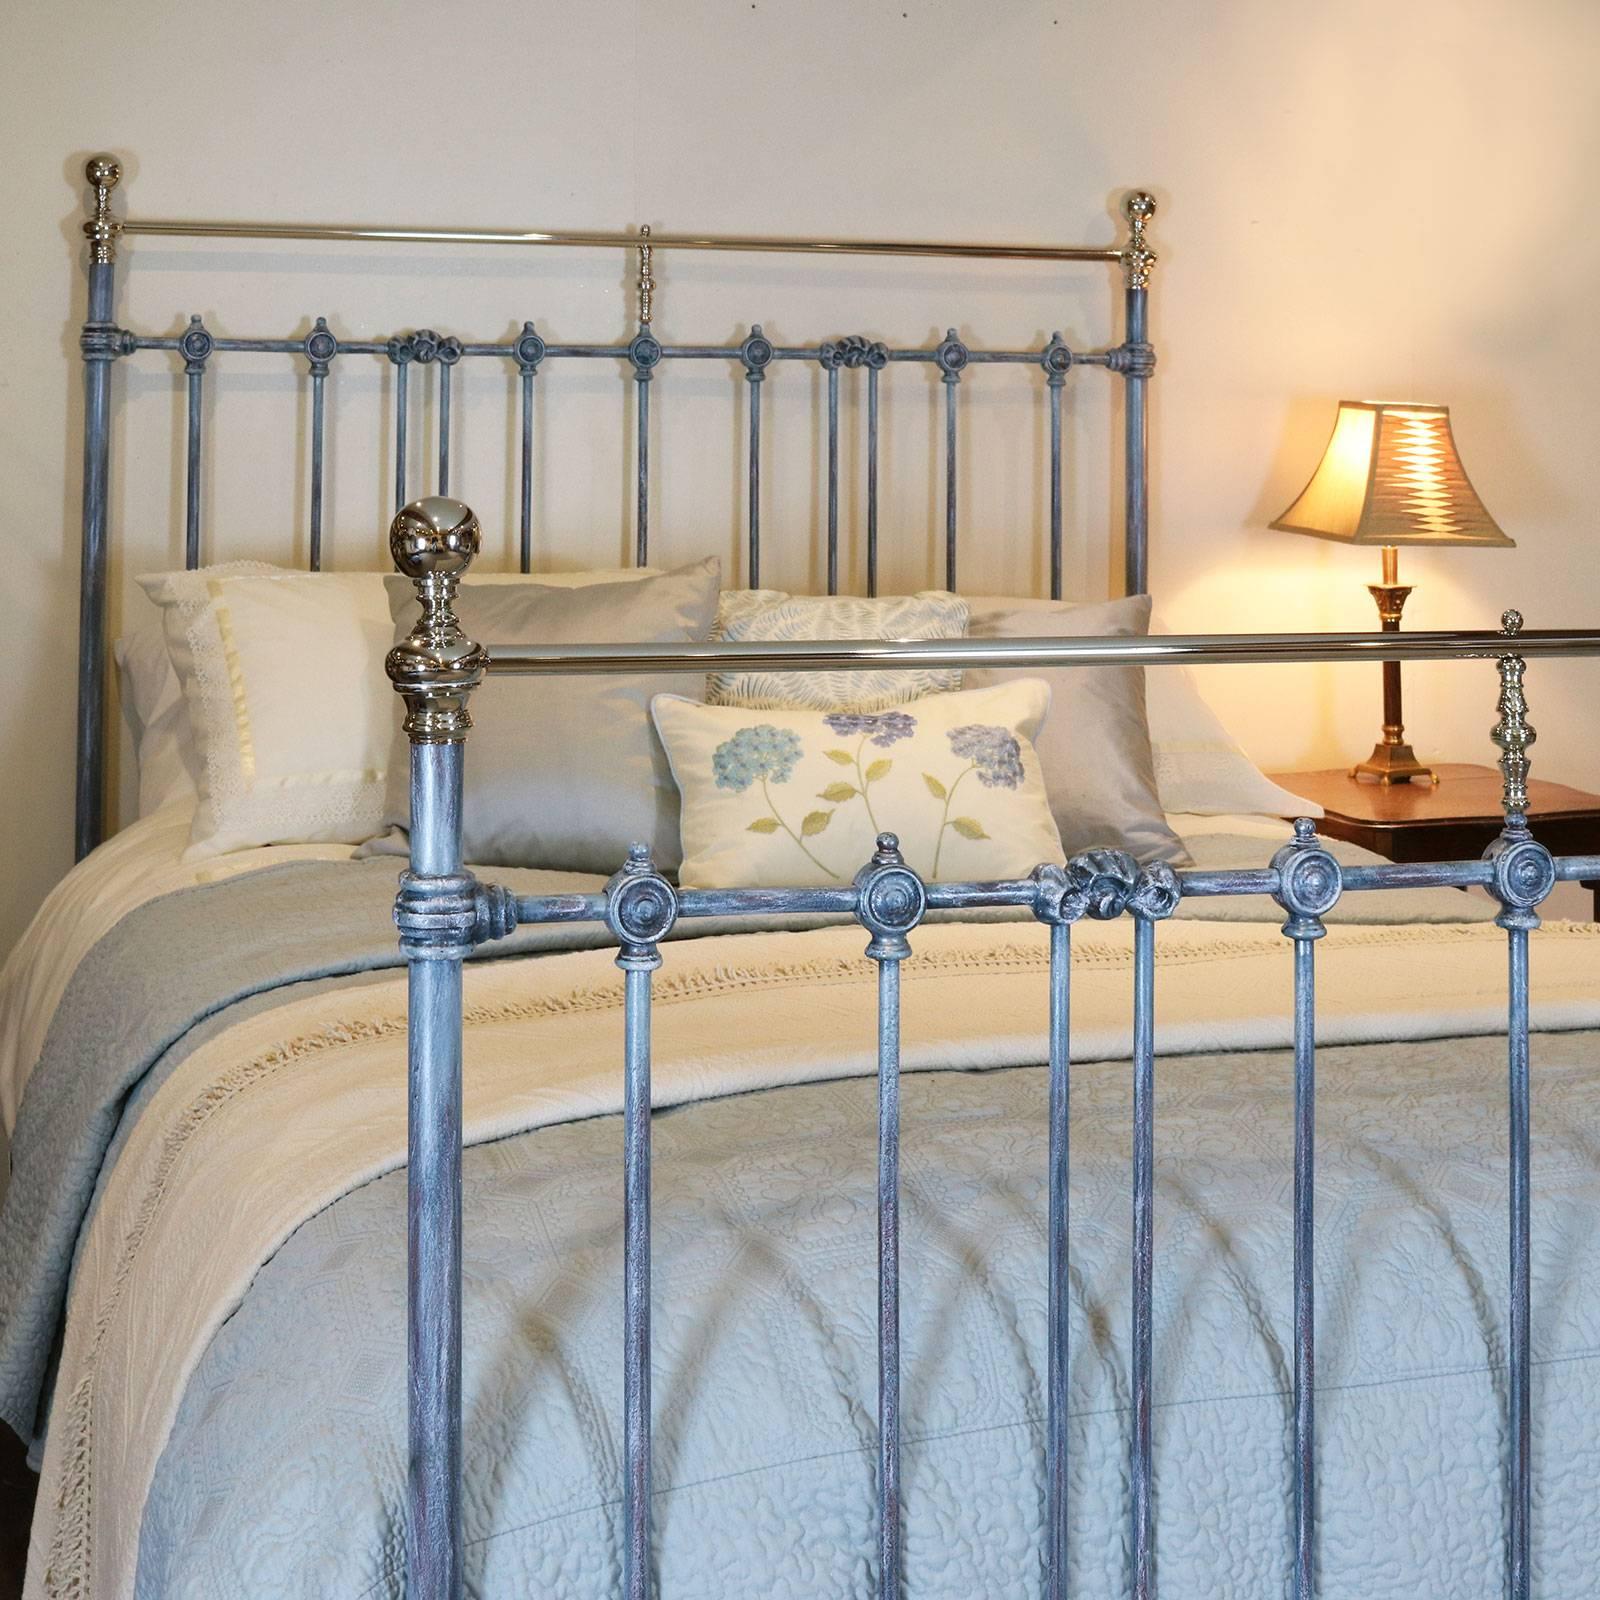 A metal bed adapted from an original Victorian frame and finished in blue tonal effect with nickel plated brass work. This fine bed has been given a contemporary look with the blue and nickel.

The bed accepts a British king-size or American